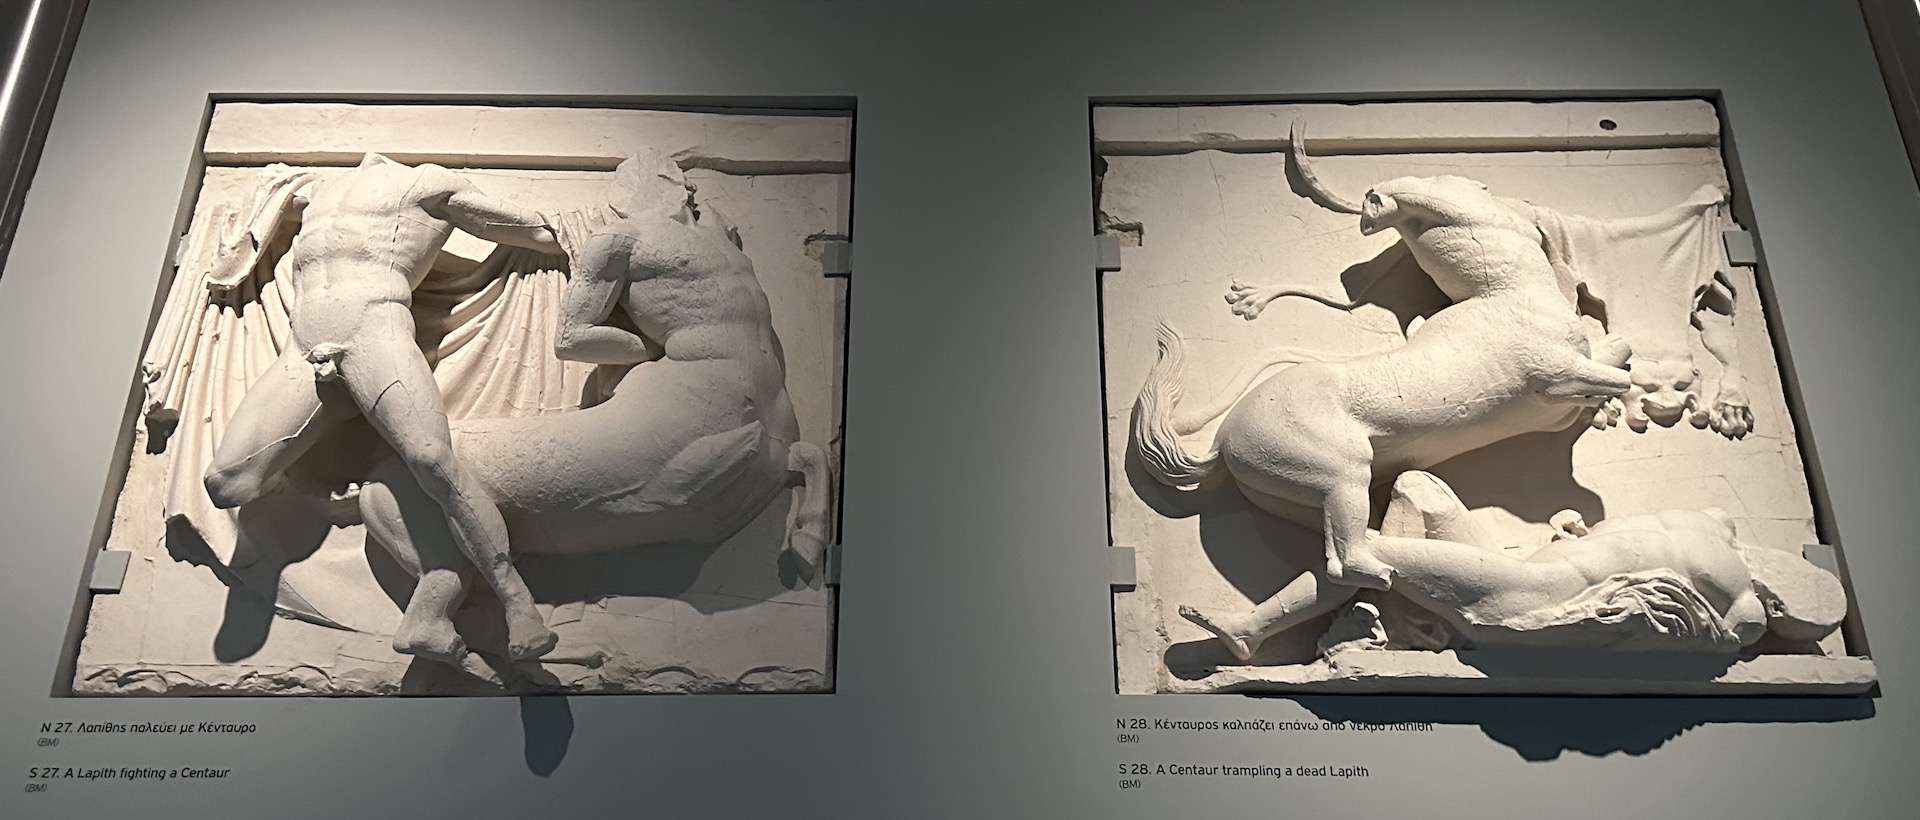 S 27 and S 28 on the south metopes of the Parthenon